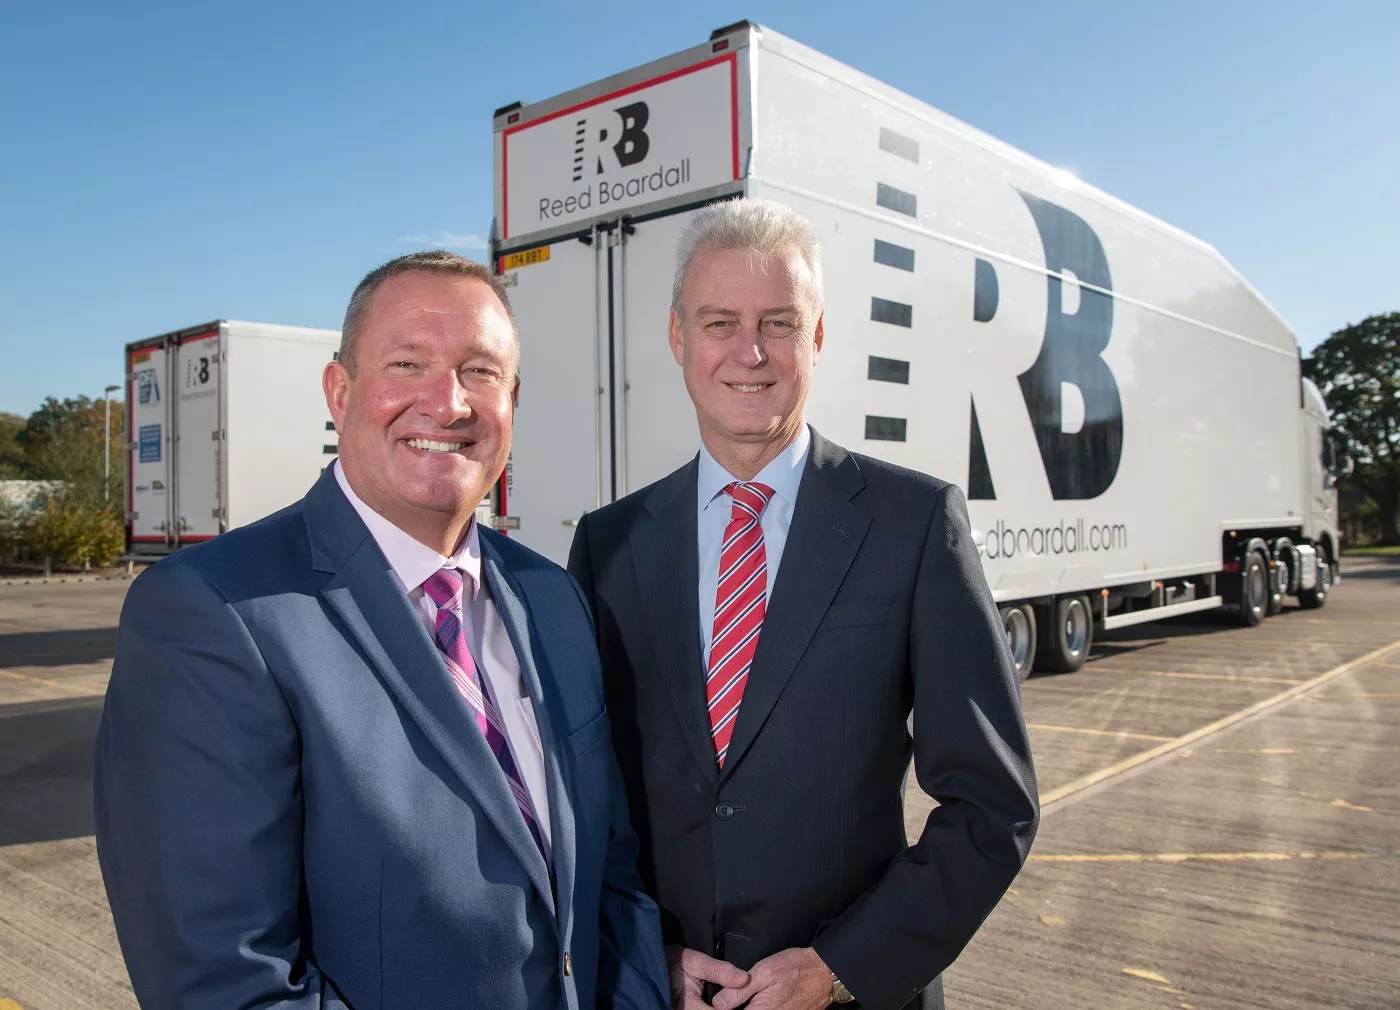 Reed Boardall invests in another 30 bespoke refrigerated semi-trailers with Gray & Adams